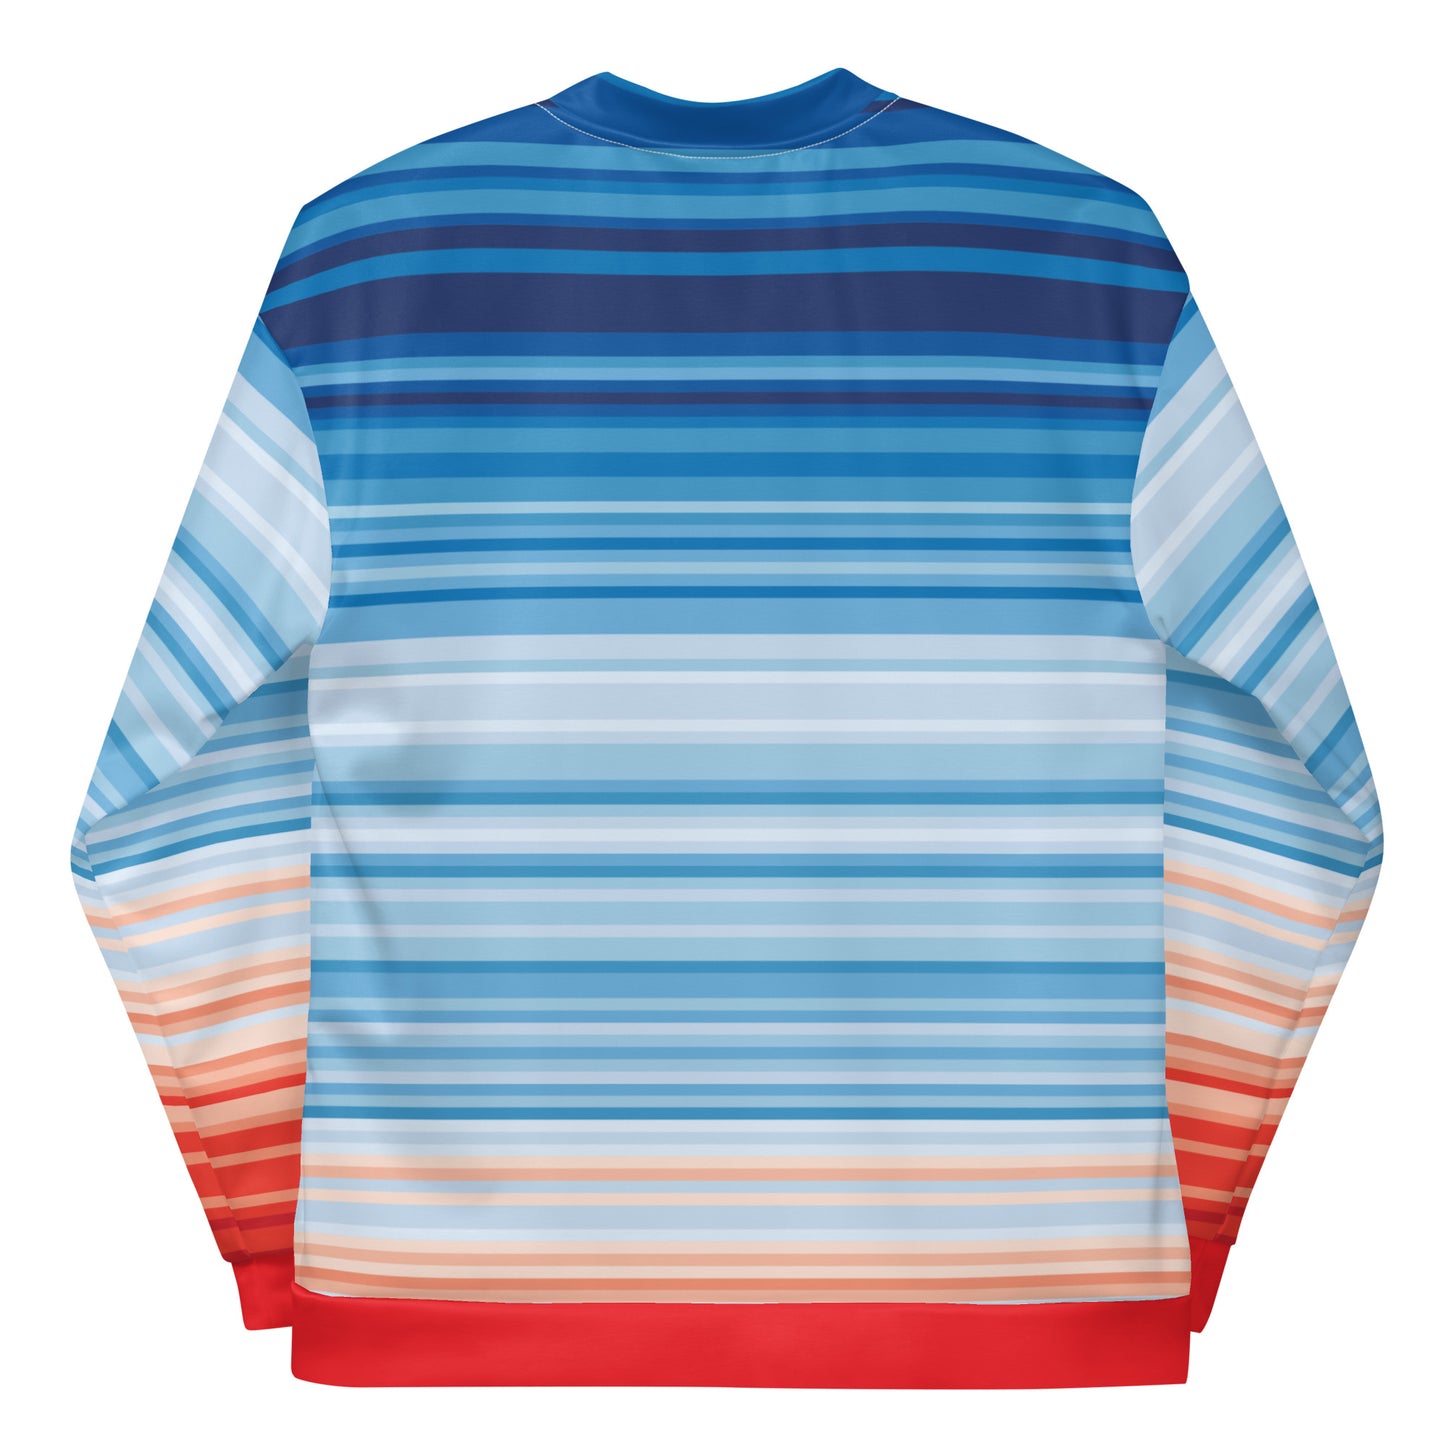 Climate Change Global Warming Stripes - Sustainably Made Jacket